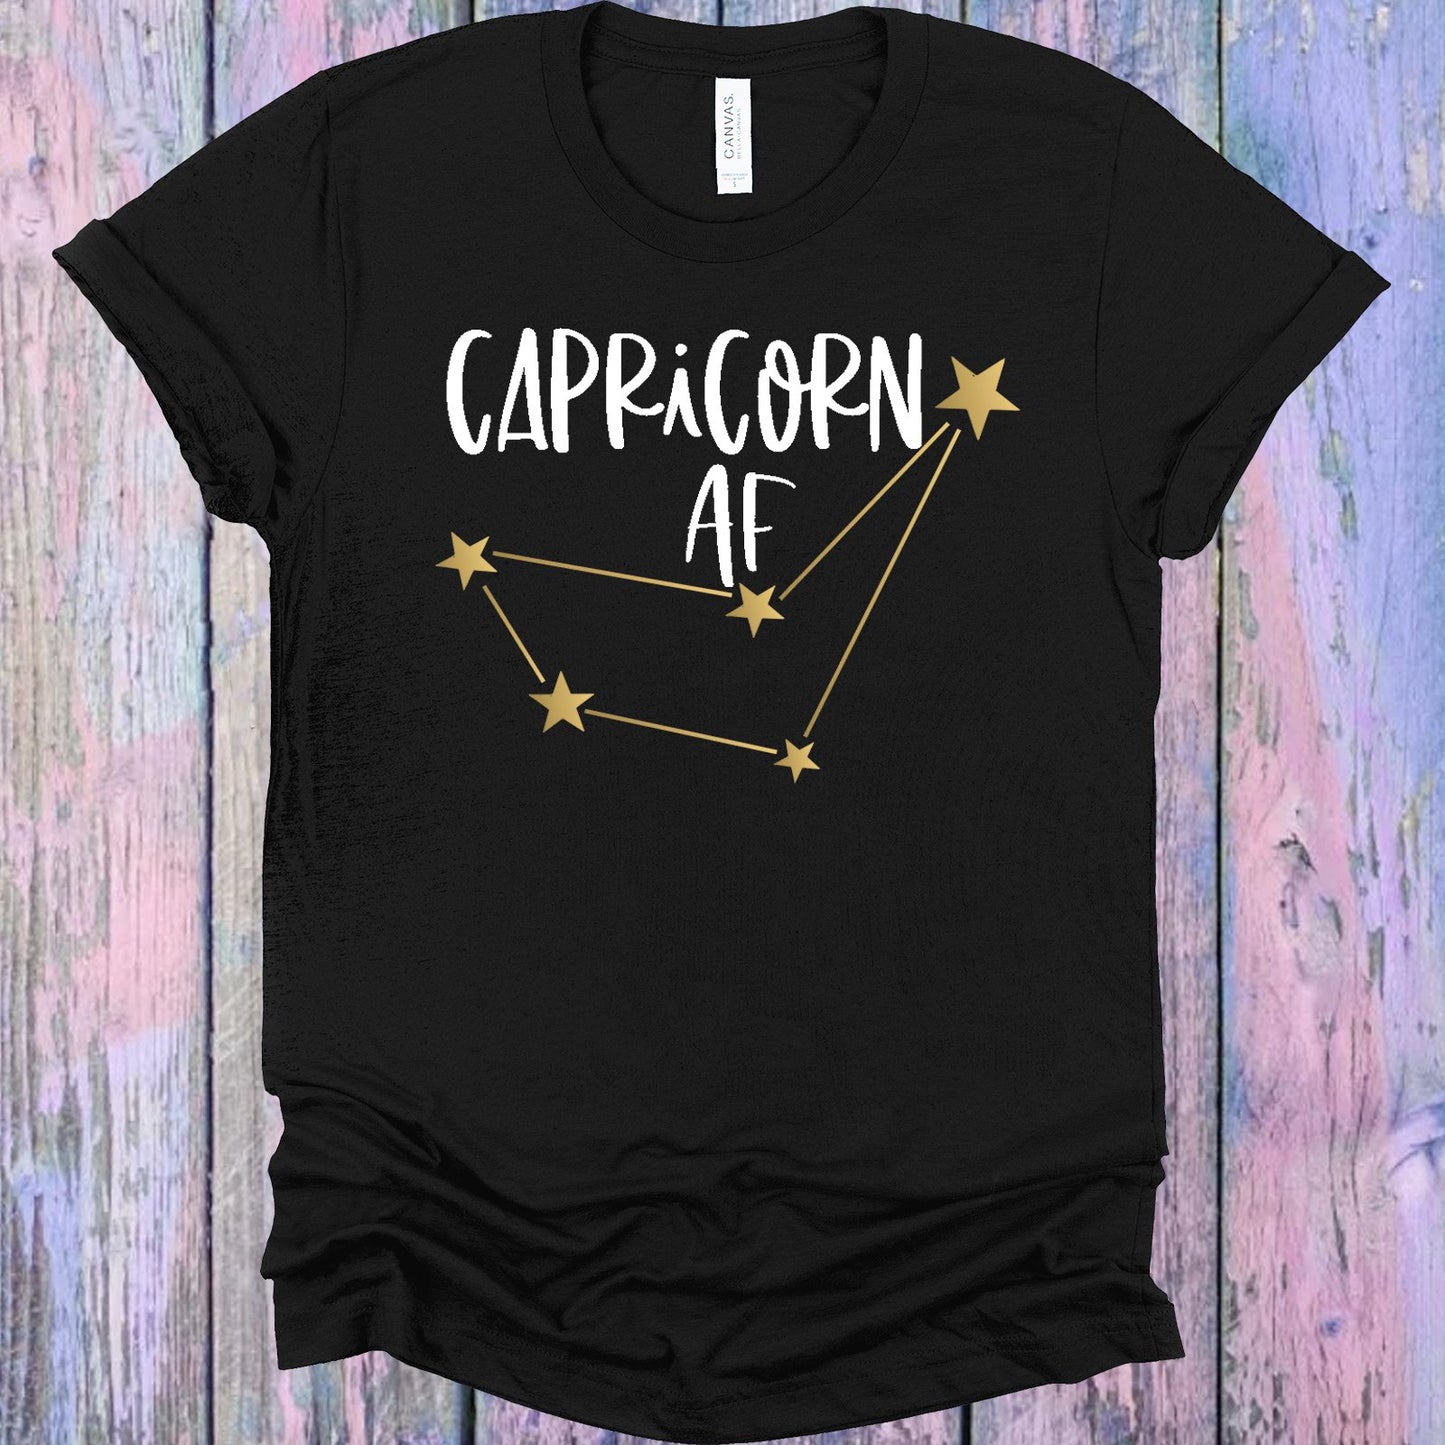 Capricorn Af Graphic Tee Graphic Tee